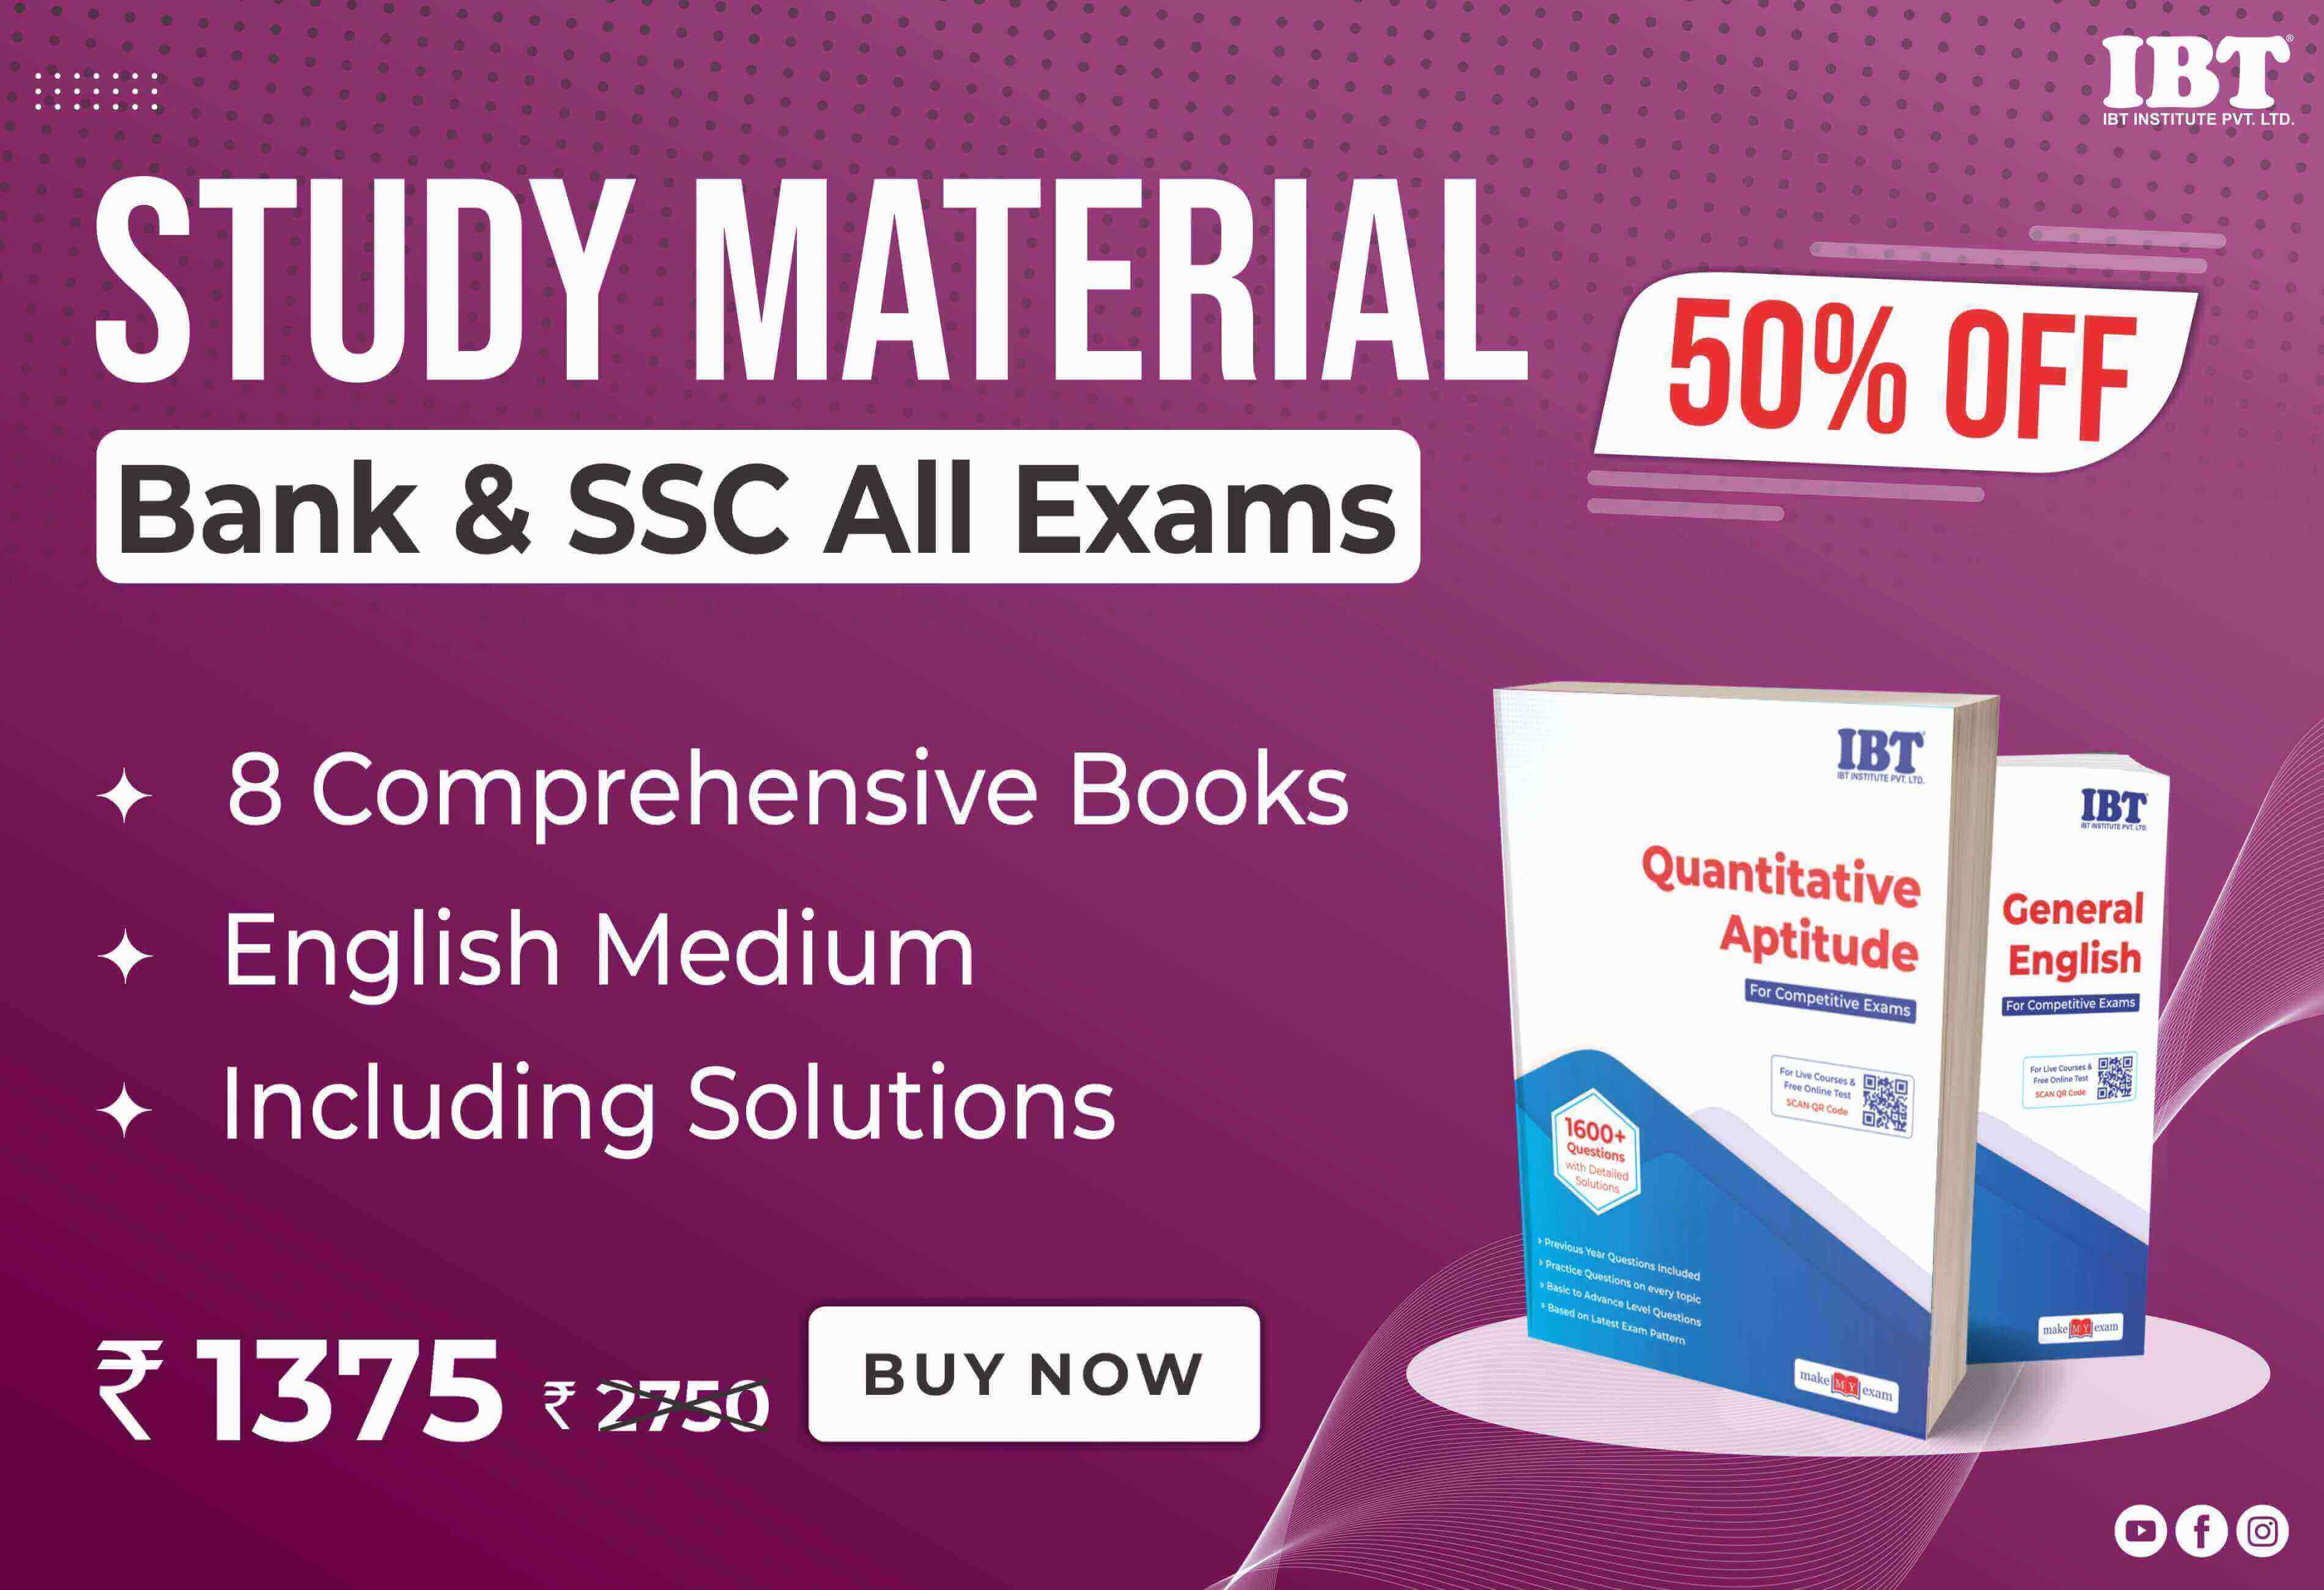 Bank and SSC Material